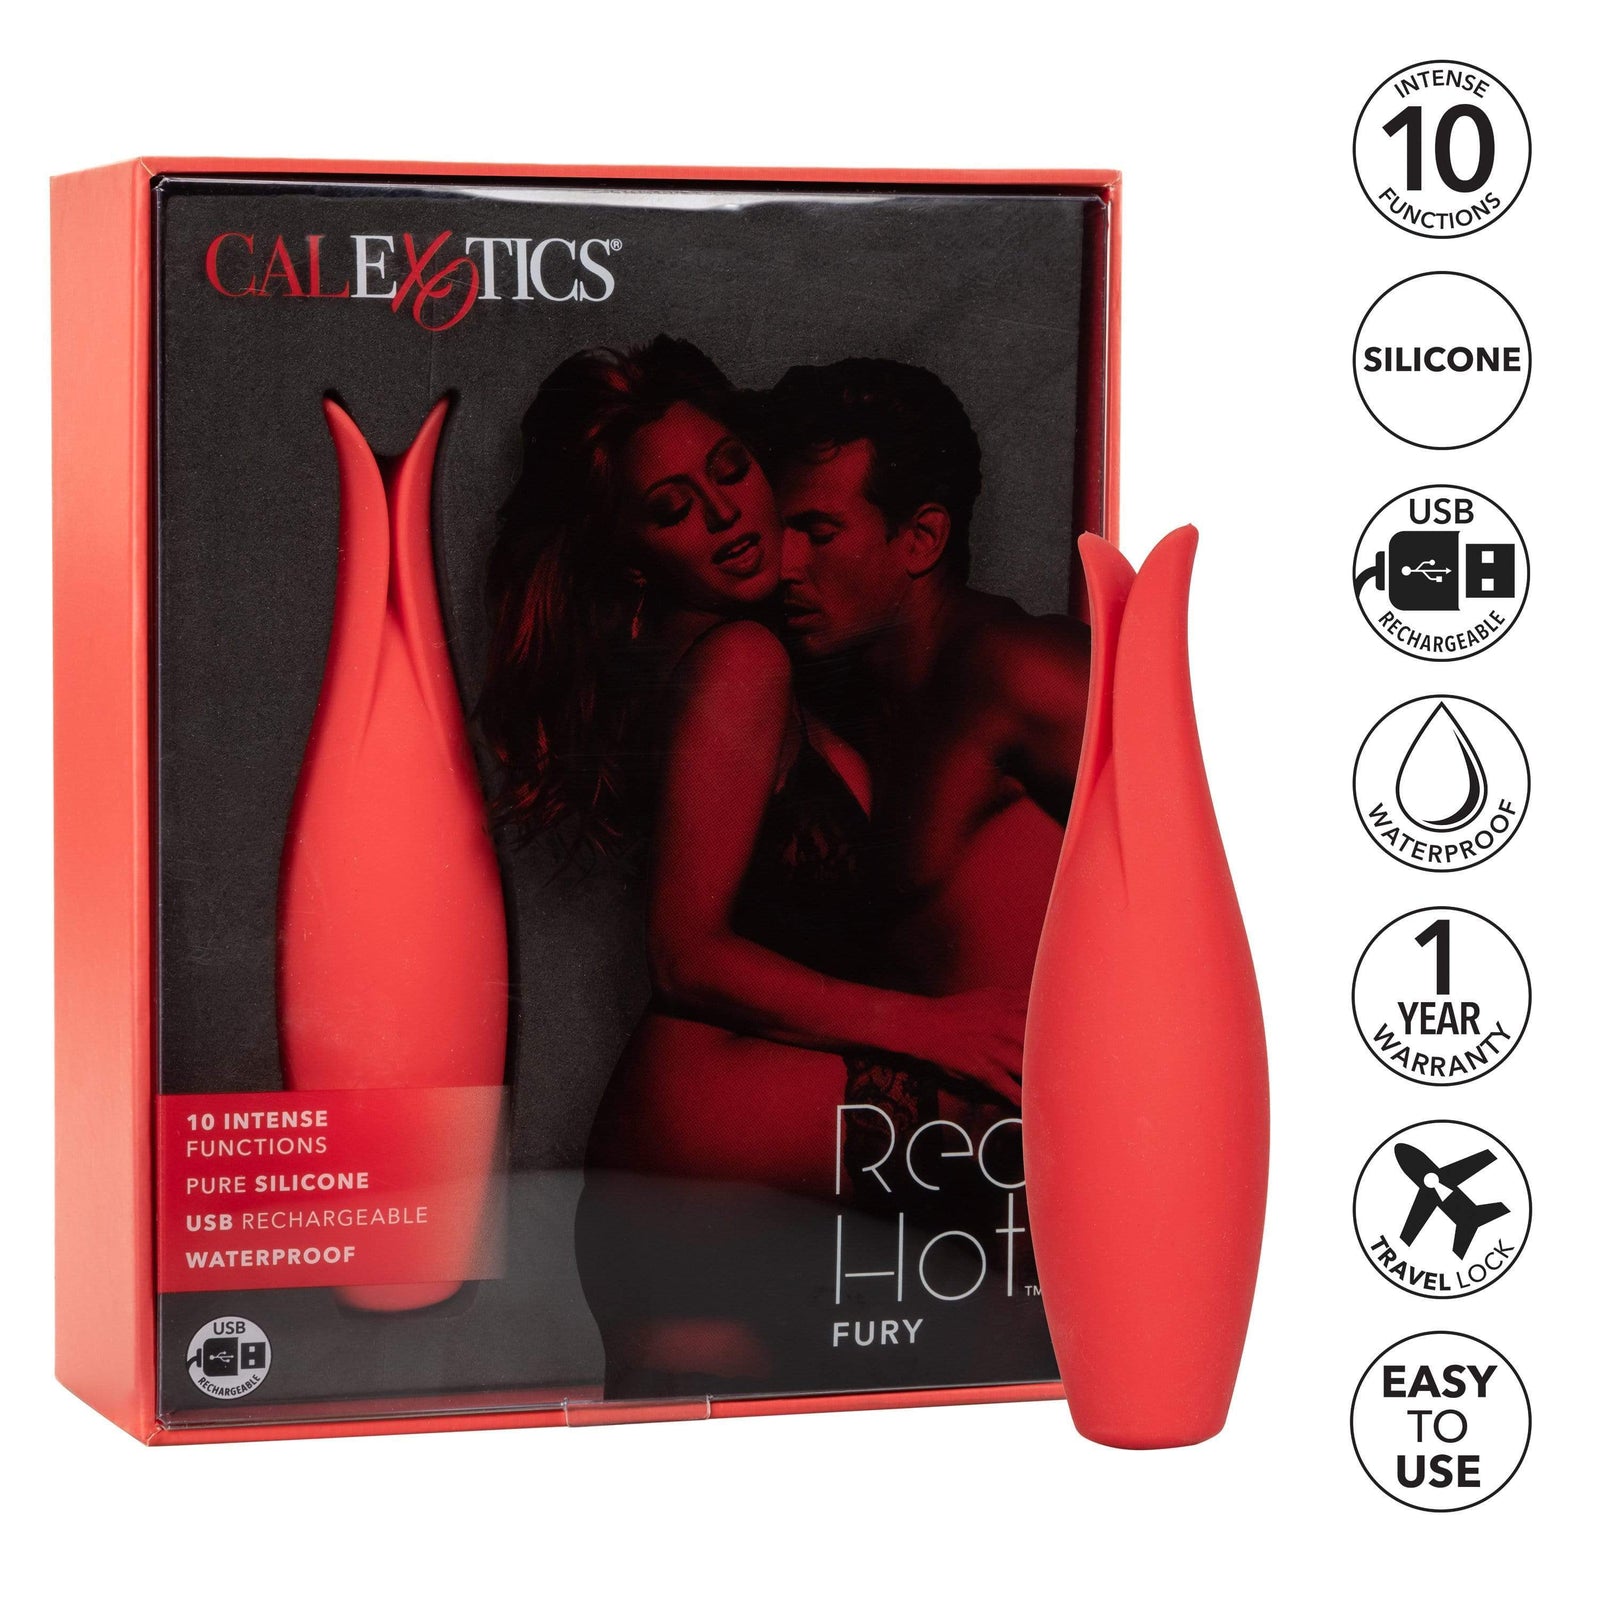 California Exotics - Red Hot Fury Clit Massager (Red) Clit Massager (Vibration) Rechargeable Durio Asia